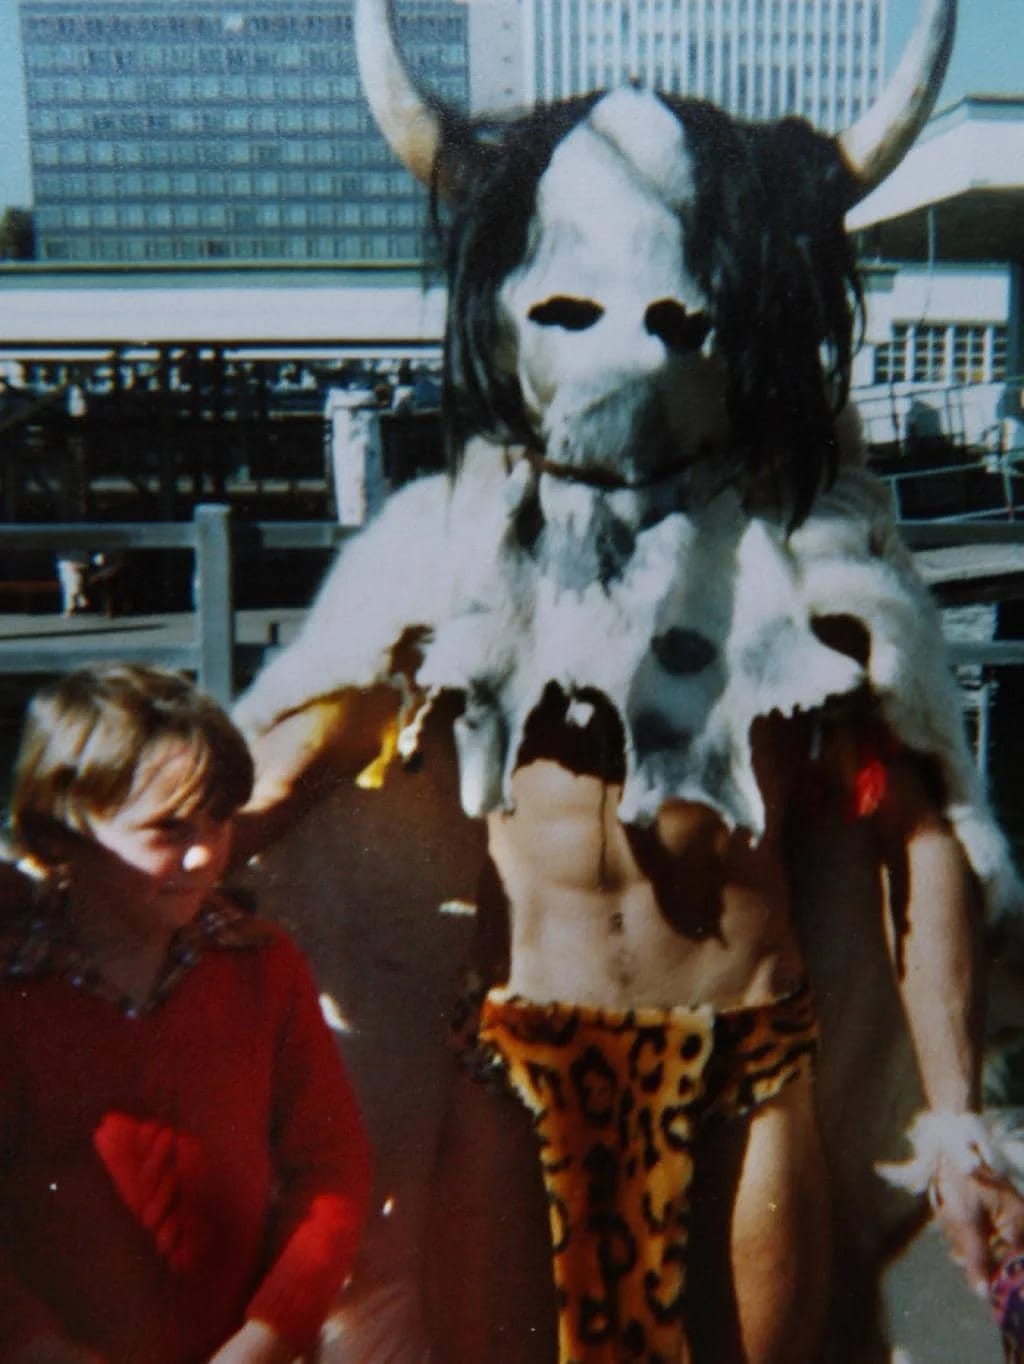 Photo that appears to be taken on a park or boardwalk, of a kid next to an adult. The adult is topless, but largely shrouded by a white animal skin that covers head as well as upper body. It has eyes cut out, black hair attached, and horns sticking out the side. He's also wearing a cheetah print loincloth